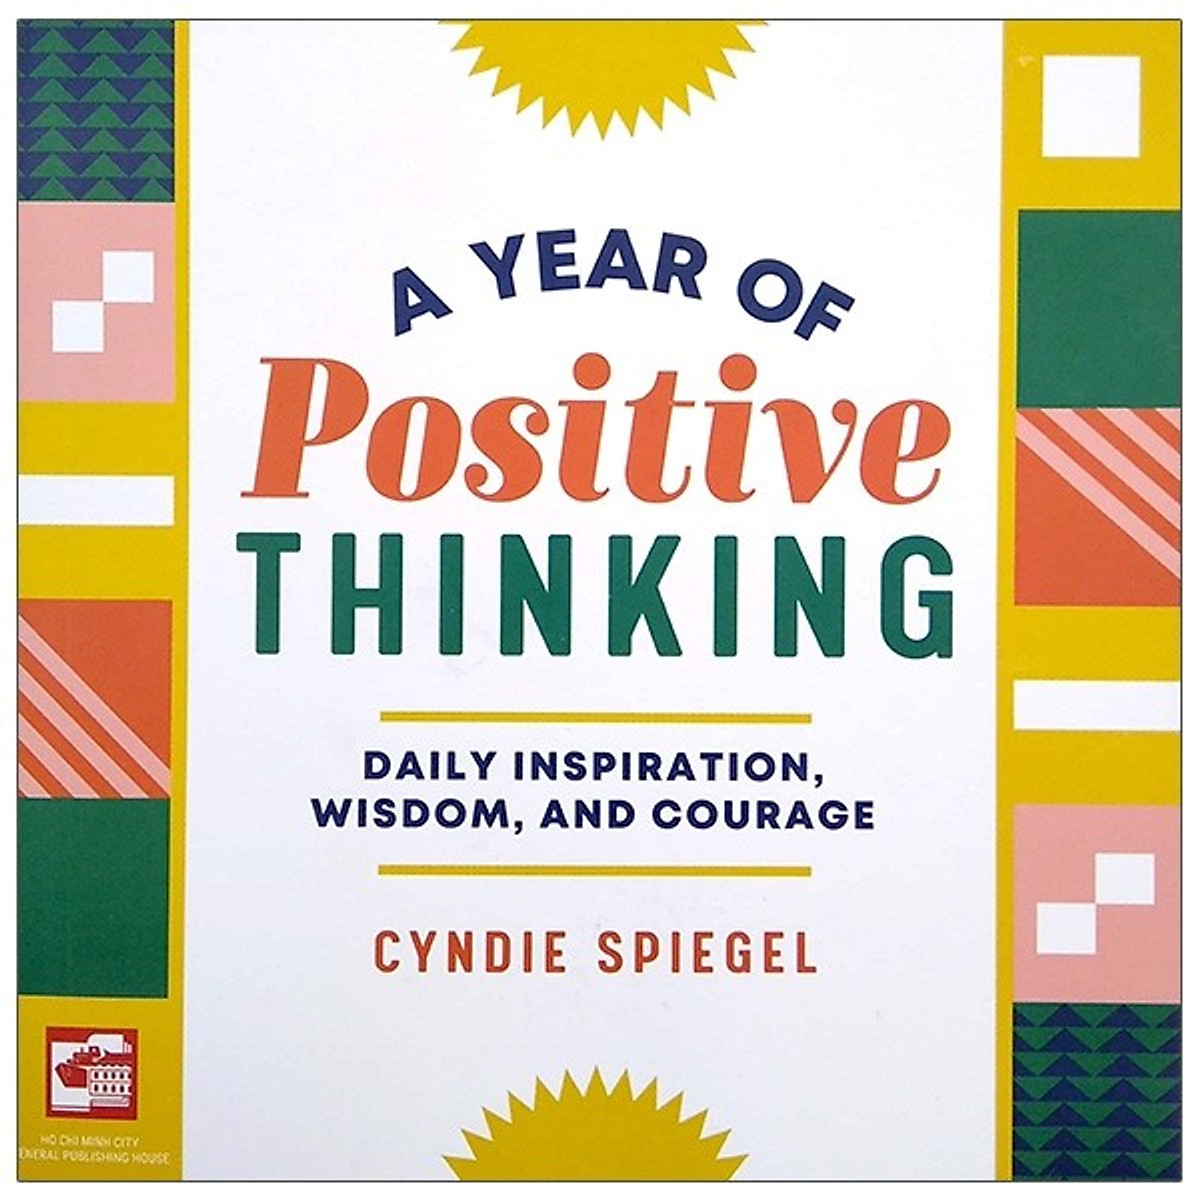 A YEAR OF POSITIVE THINKING